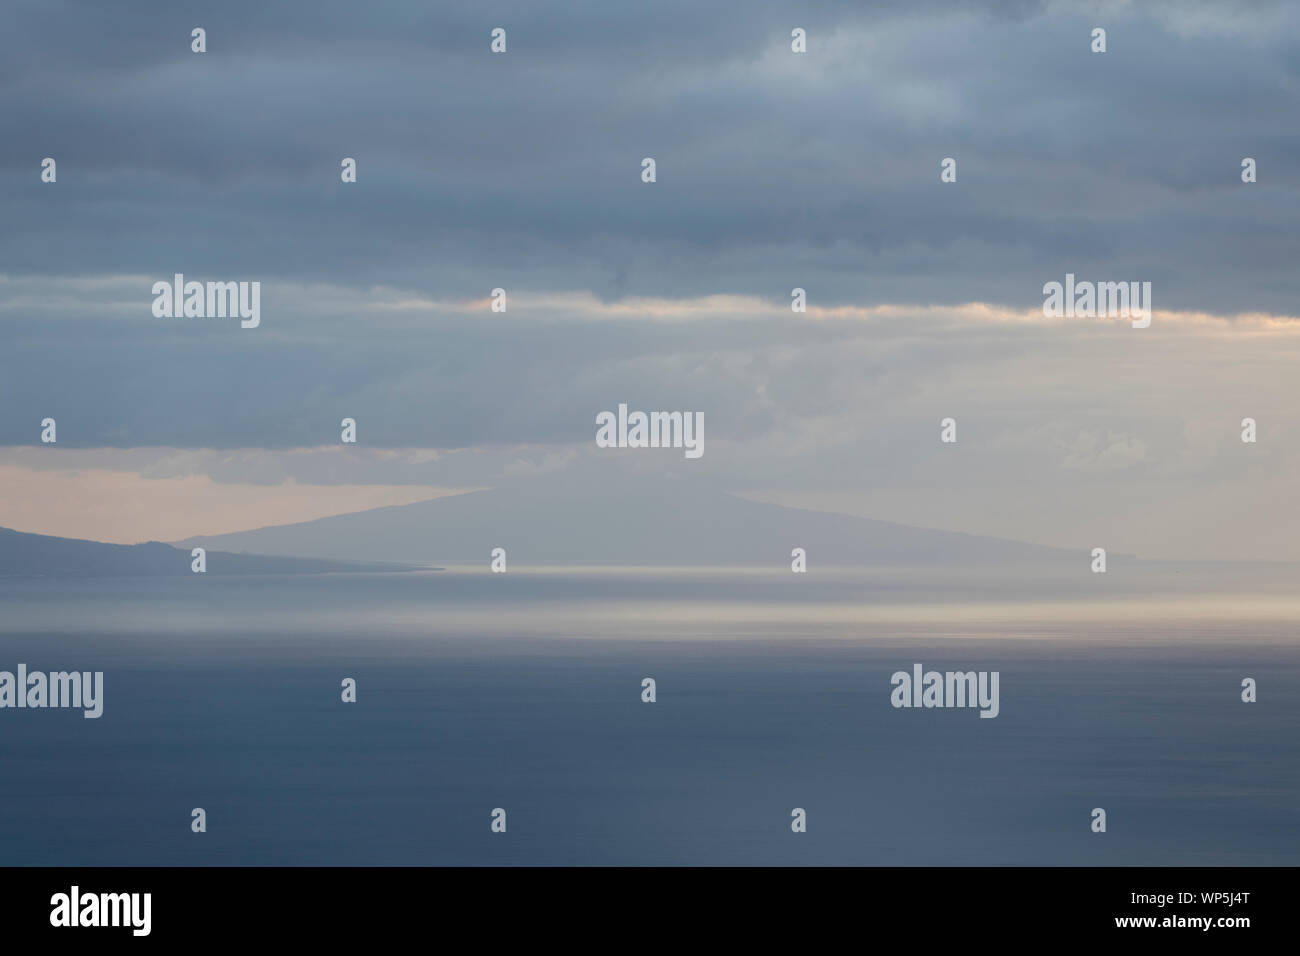 Landscape image showing cloud layers over Faial island as seen from Sao Jorge Island, Azores, Portugal Stock Photo